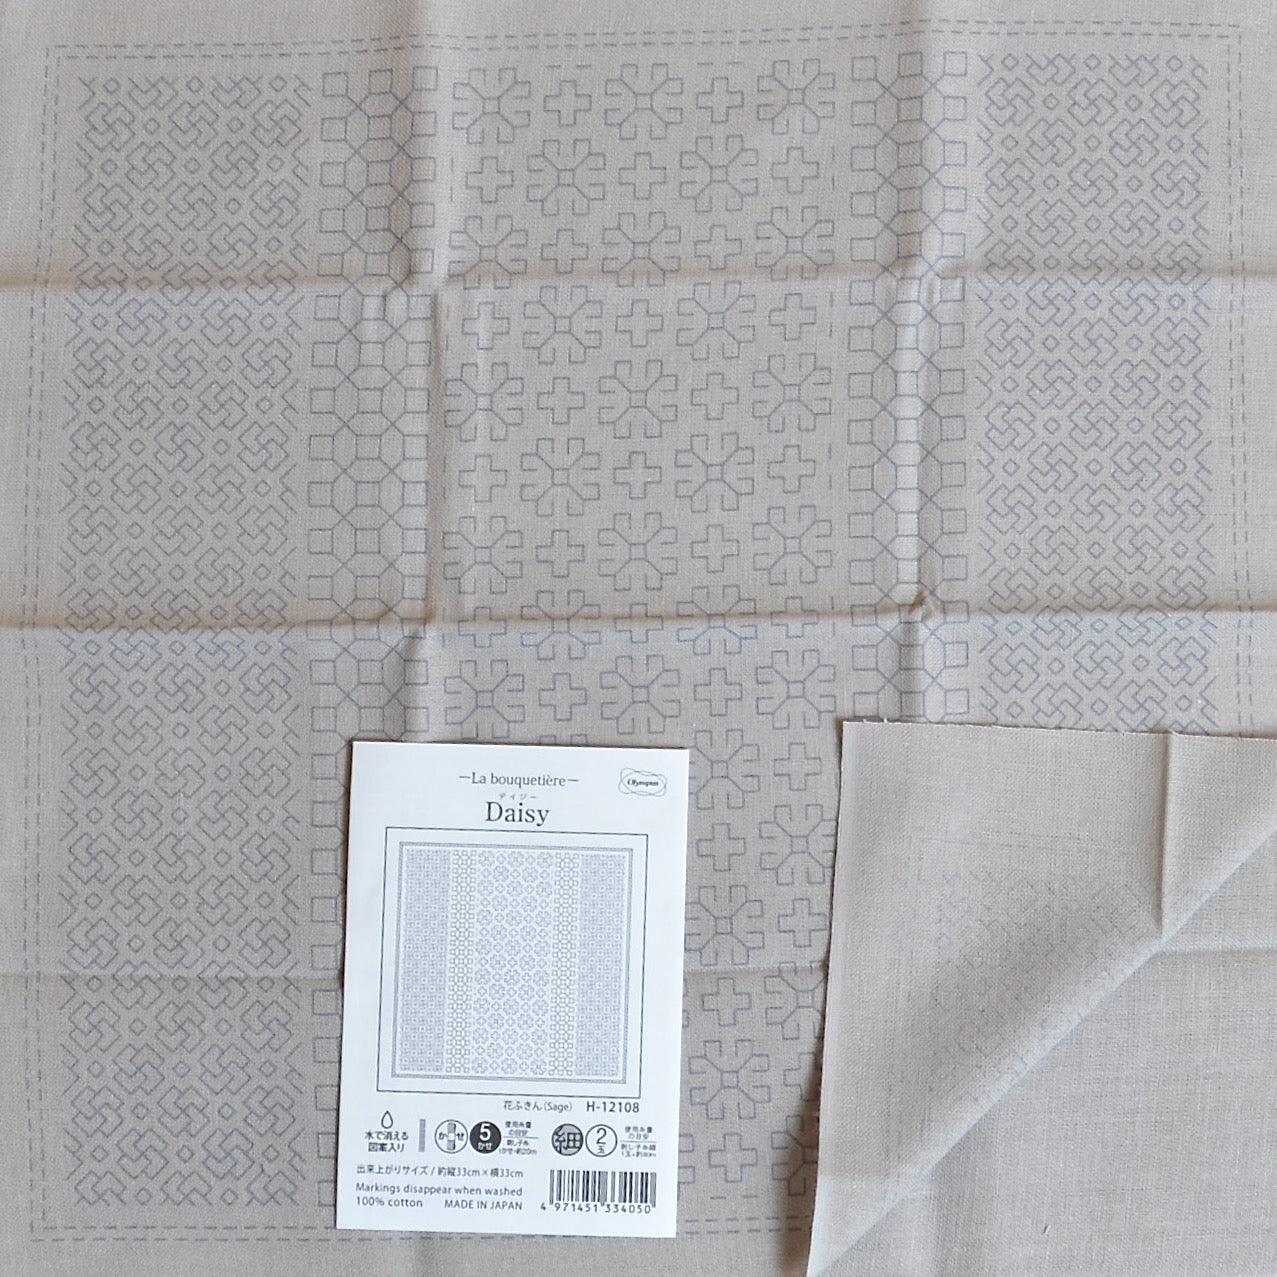 La bouquetiere "Daisy" sashiko sampler  printed with wash out ink on taupe cotton fabric